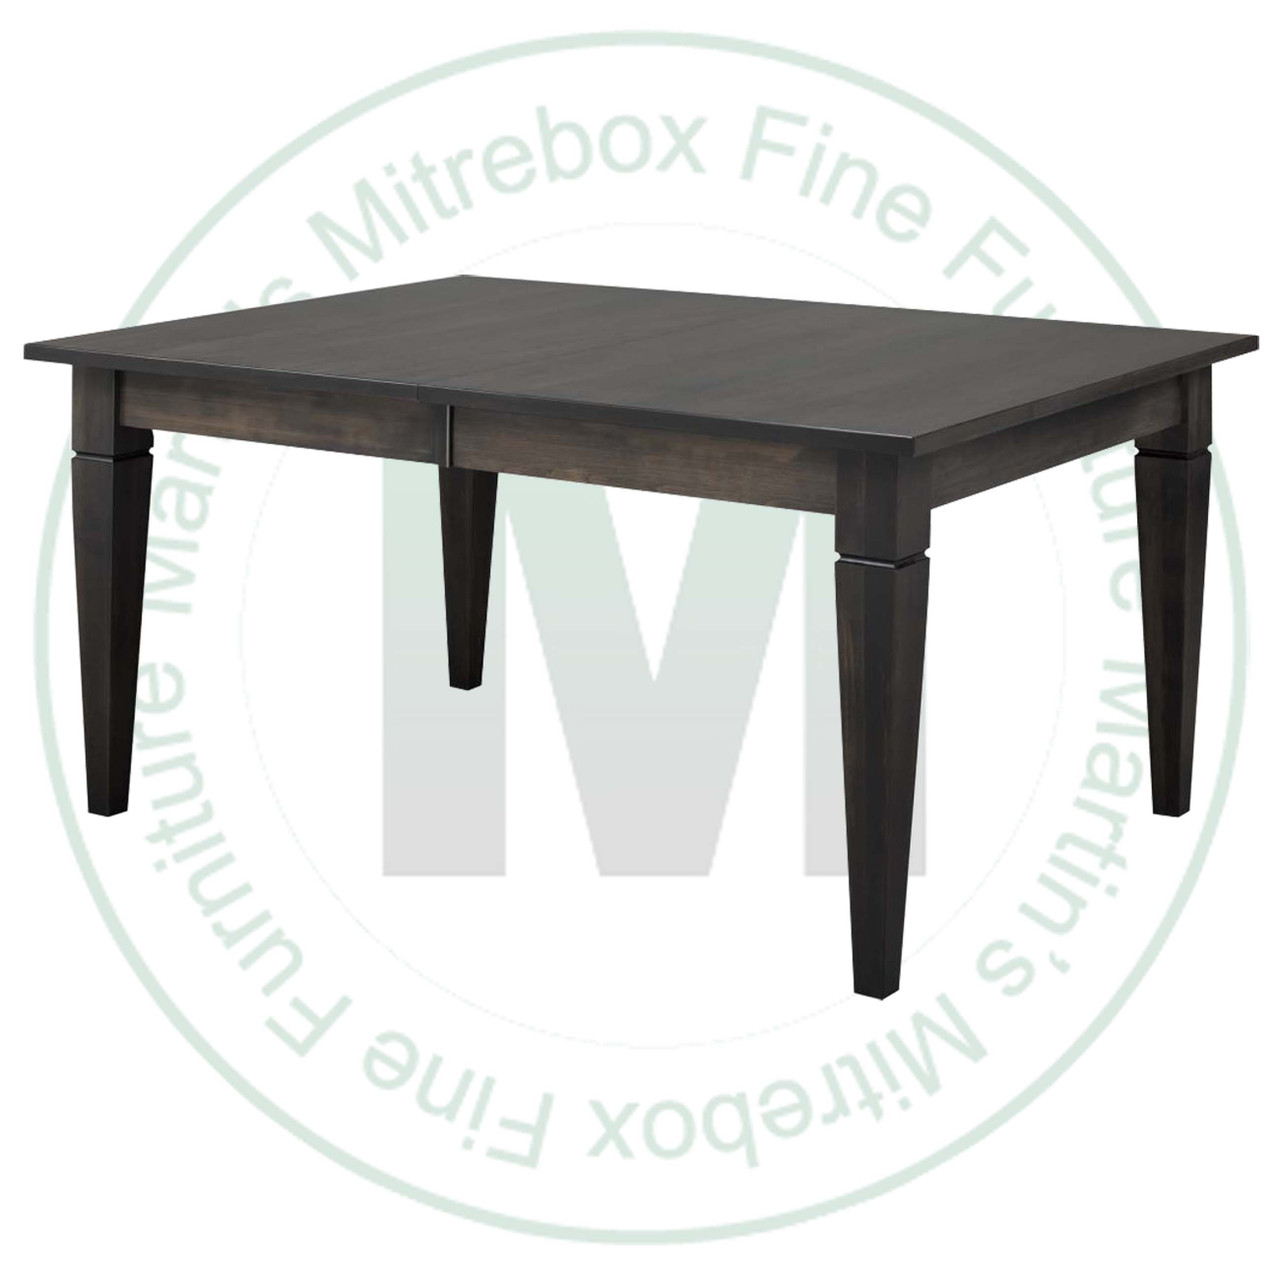 Wormy Maple Reesor Extension Harvest Table 36''D x 60''W x 30''H With 3 - 12'' Leaves Table Has 1'' Thick Top